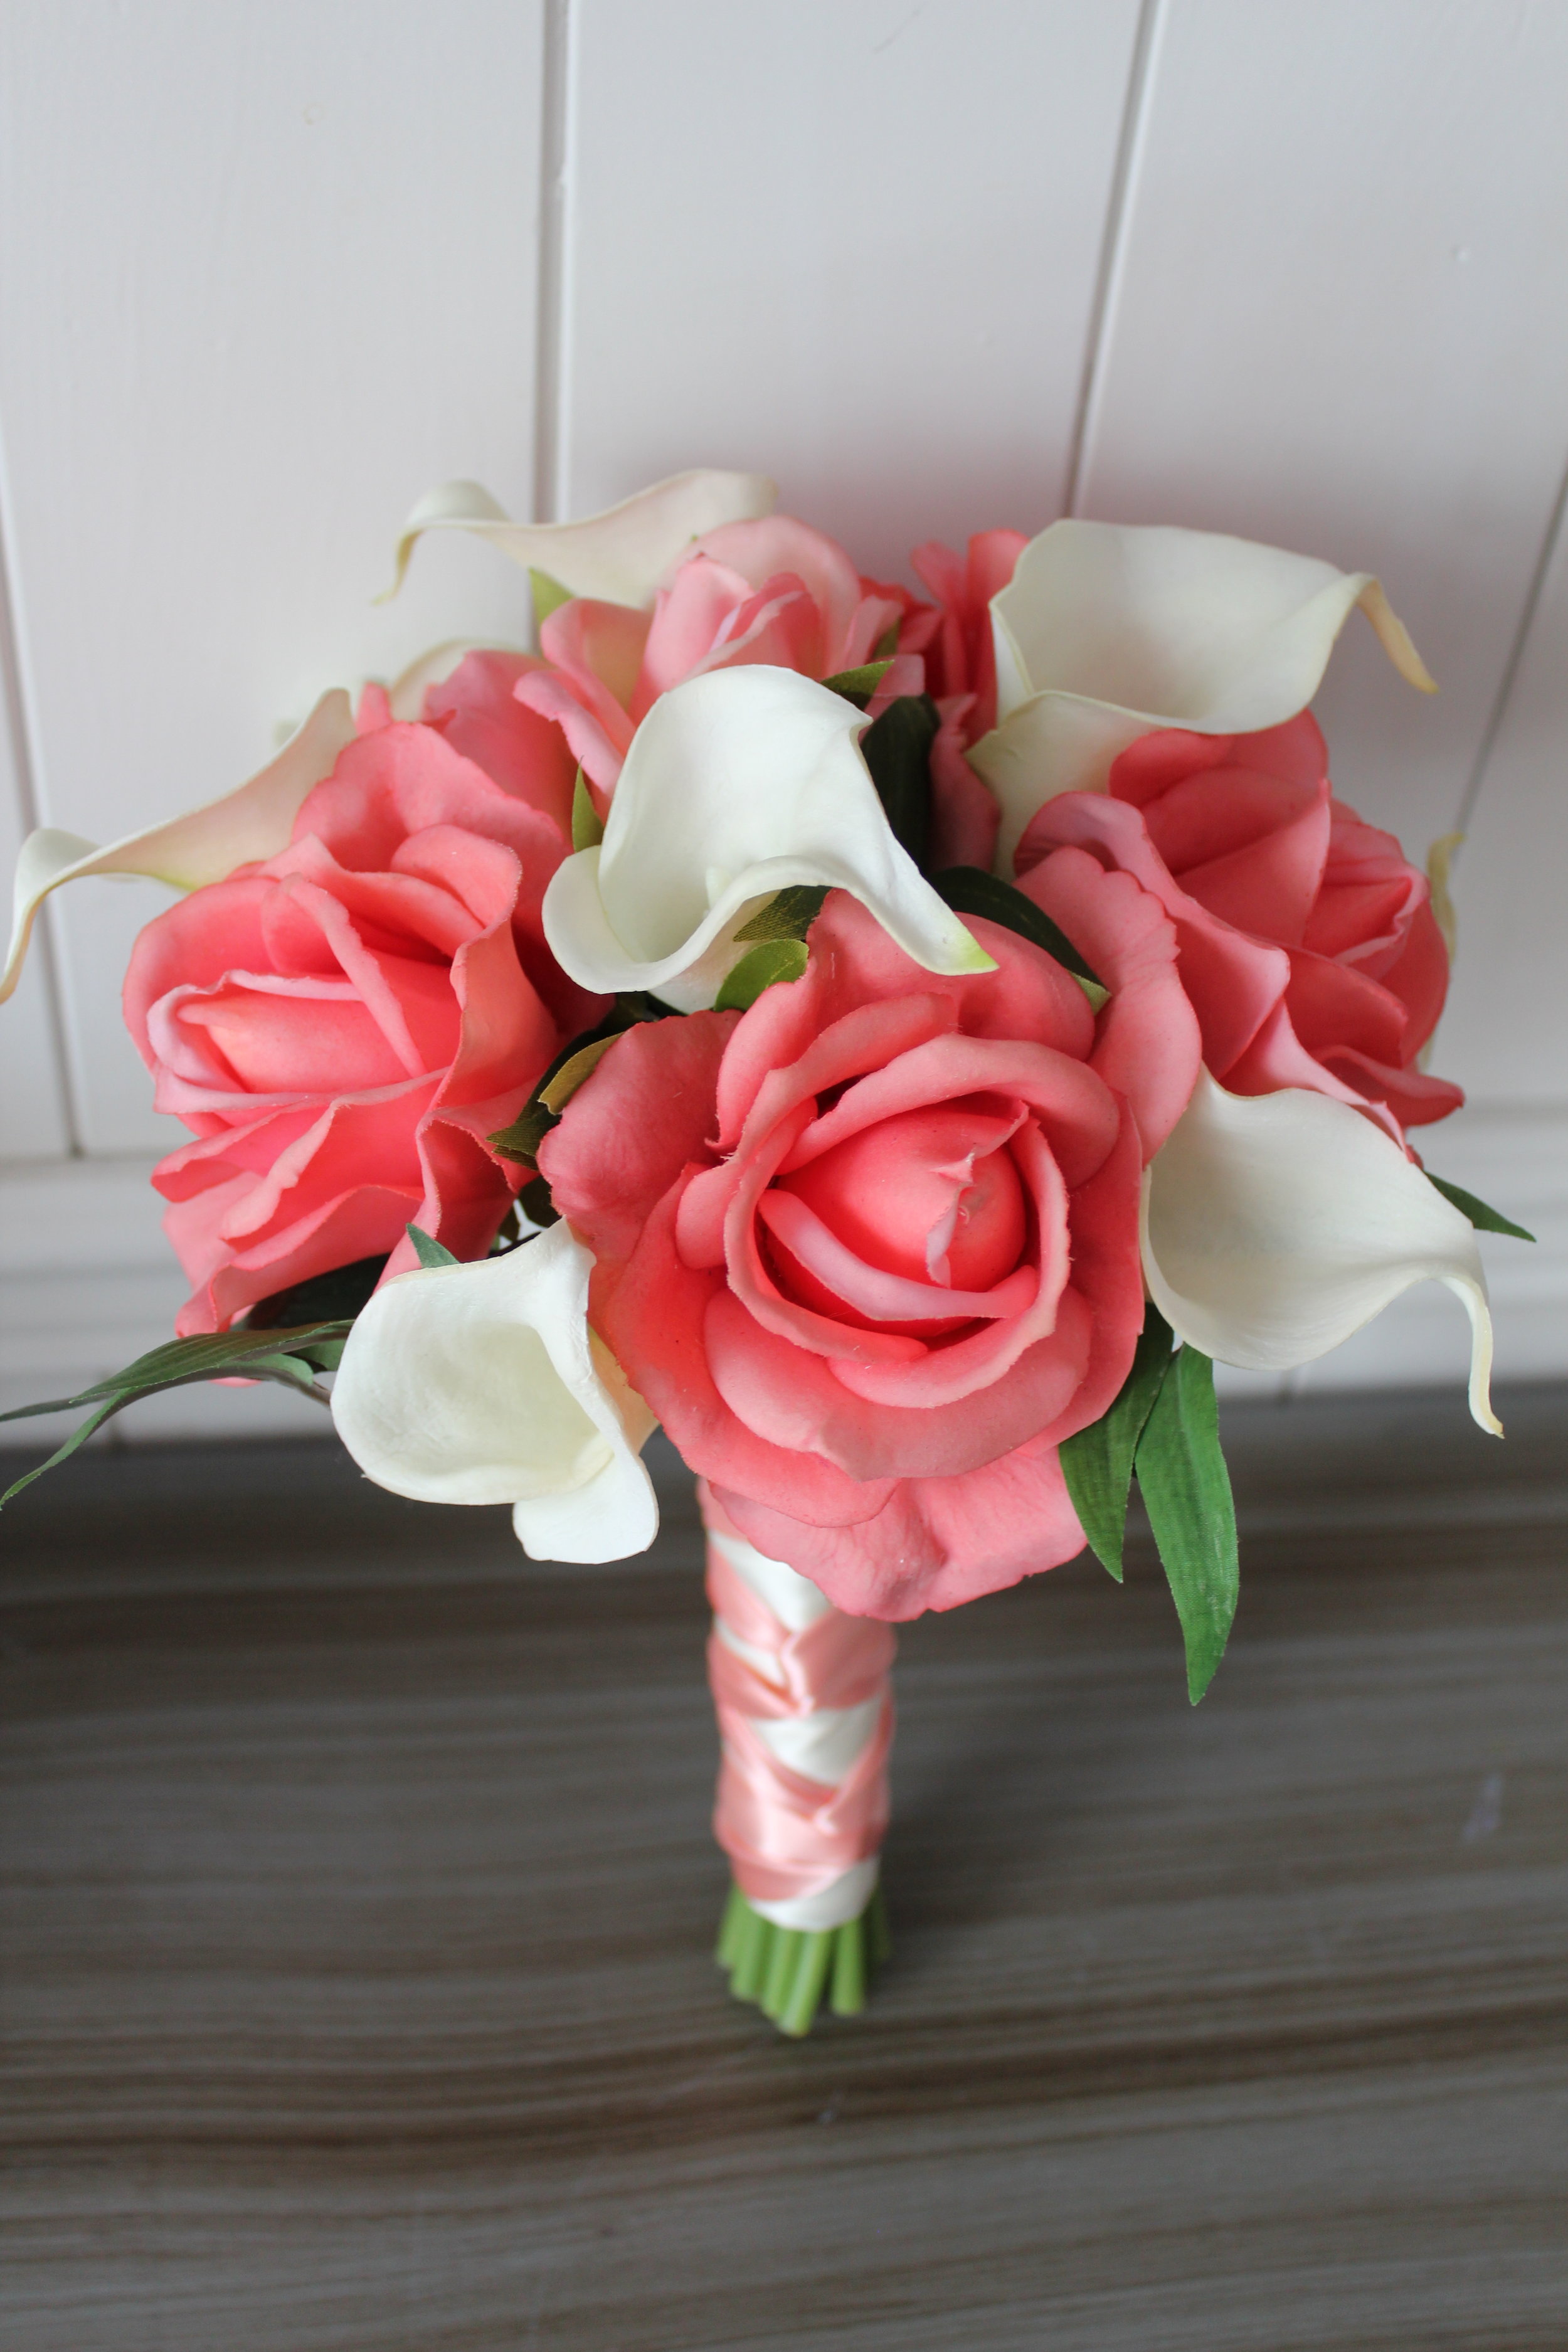 coral roses Wedding Flowers Brides & Bridesmaid bouquets ivory lillies